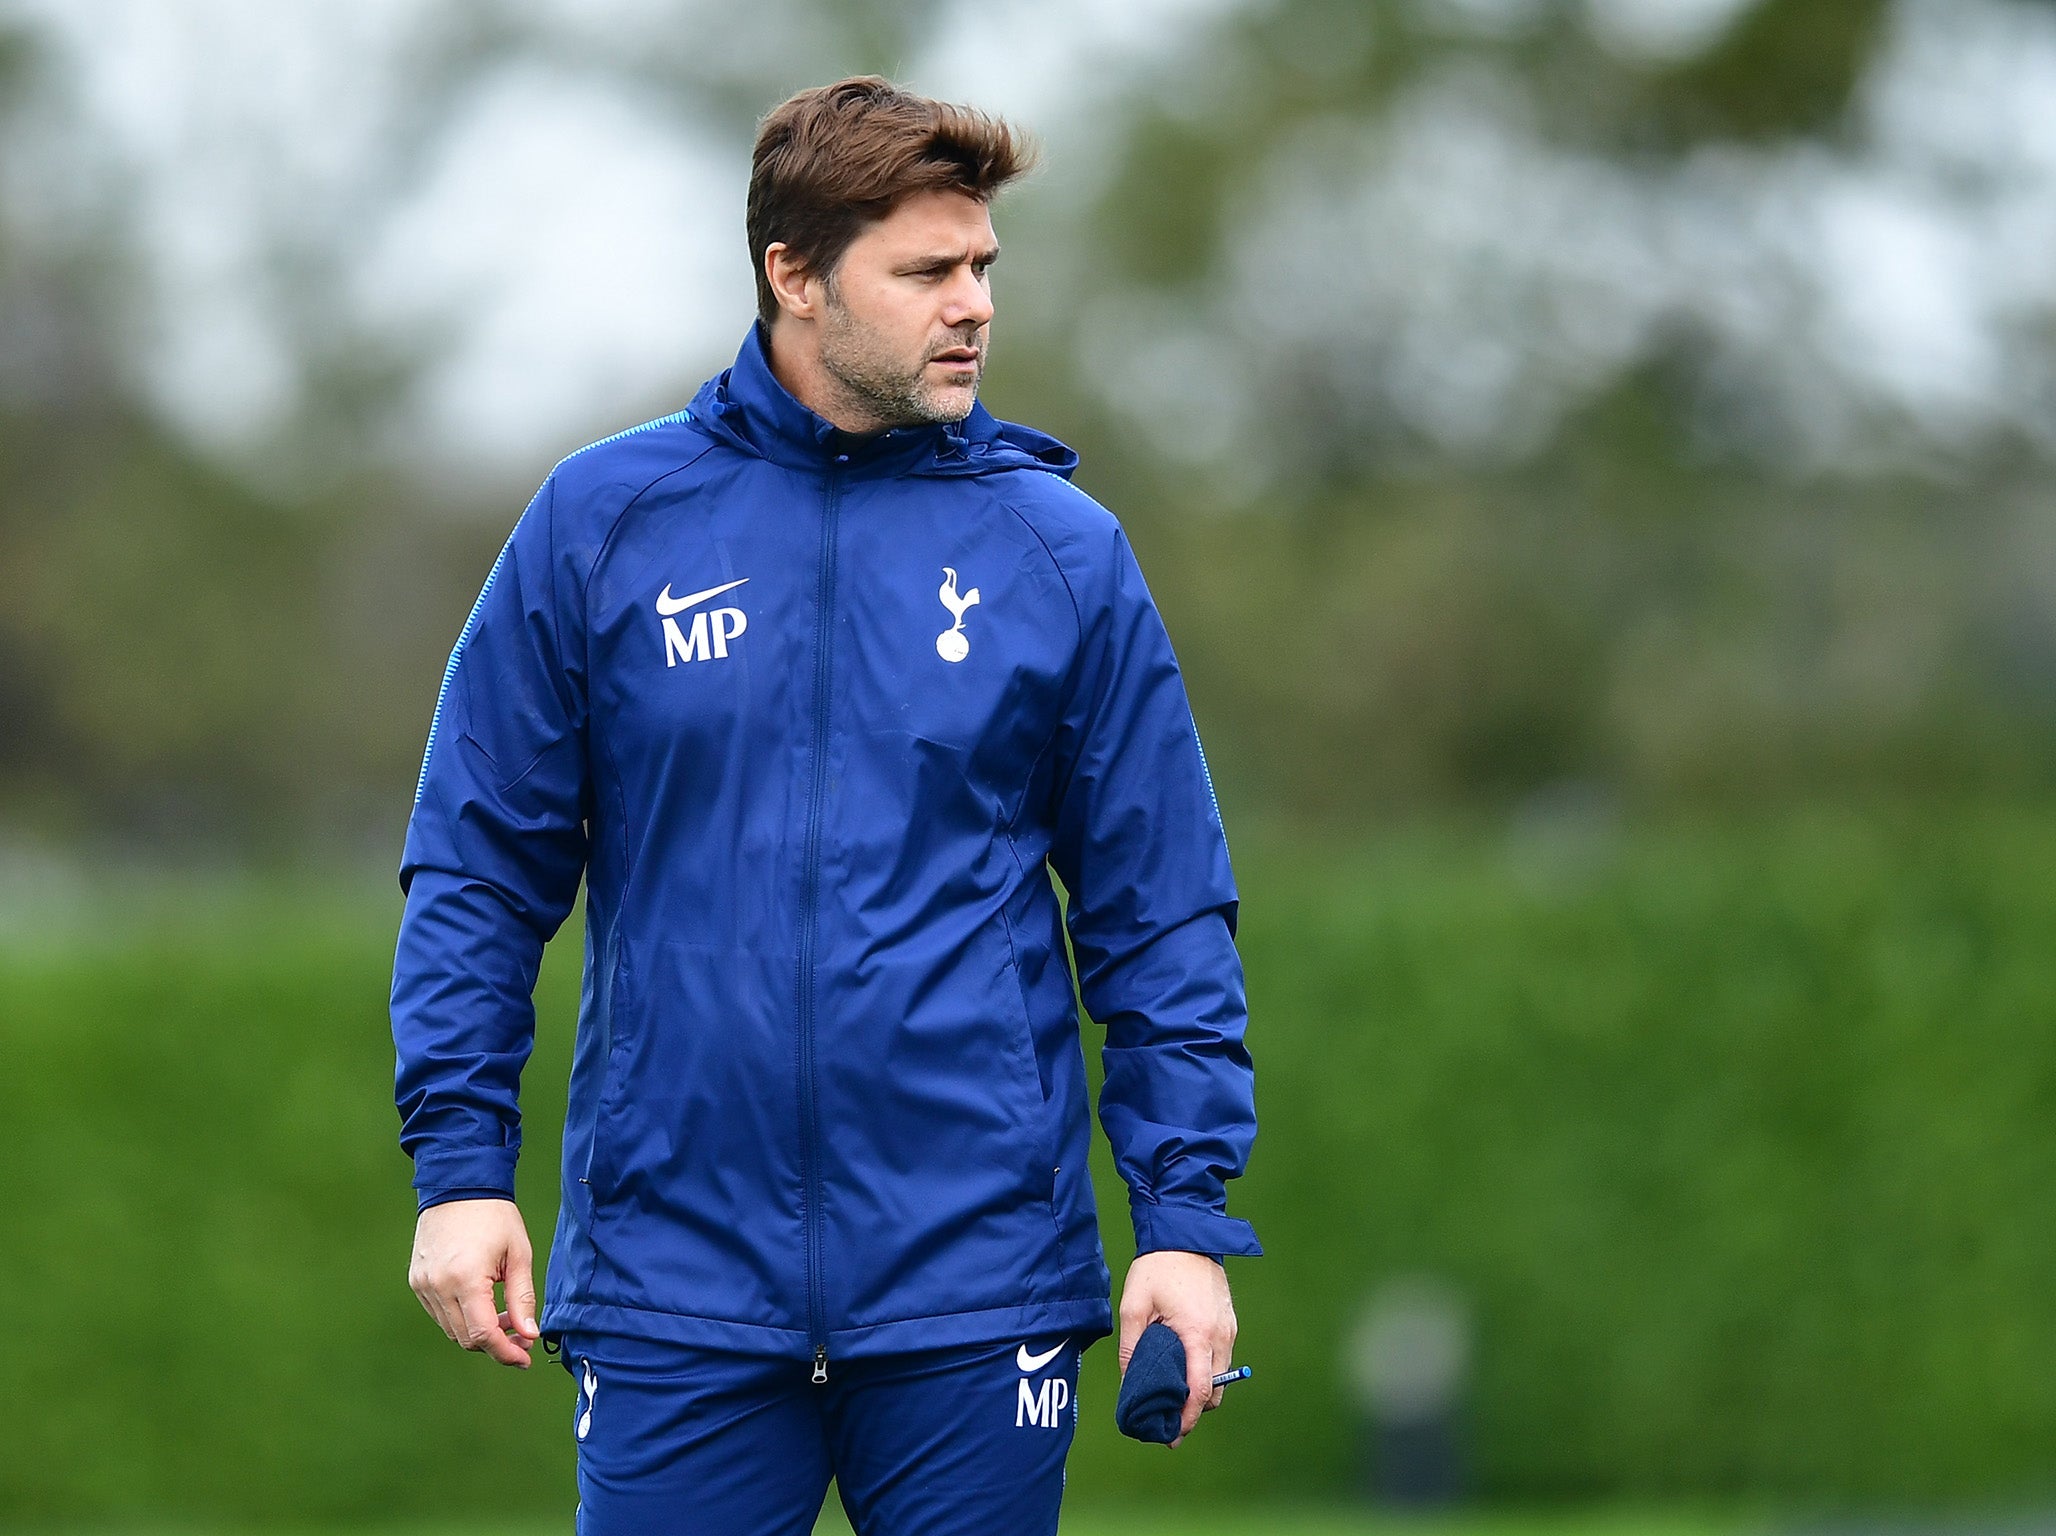 Mauricio Pochettino is very forthcoming in his opinions and emotions in the book